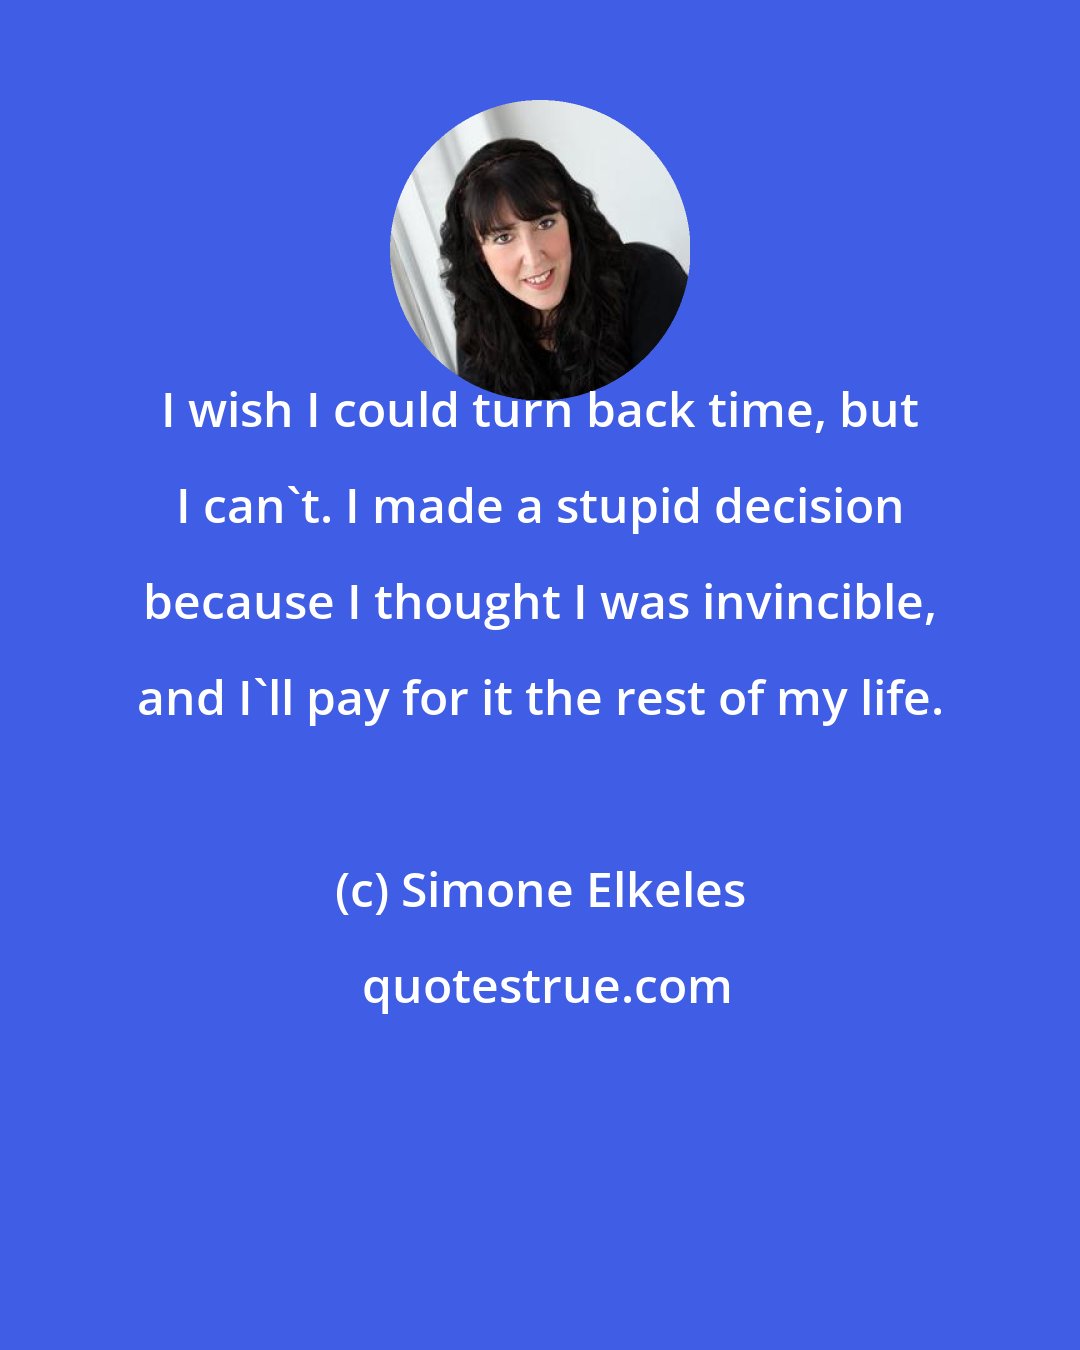 Simone Elkeles: I wish I could turn back time, but I can't. I made a stupid decision because I thought I was invincible, and I'll pay for it the rest of my life.